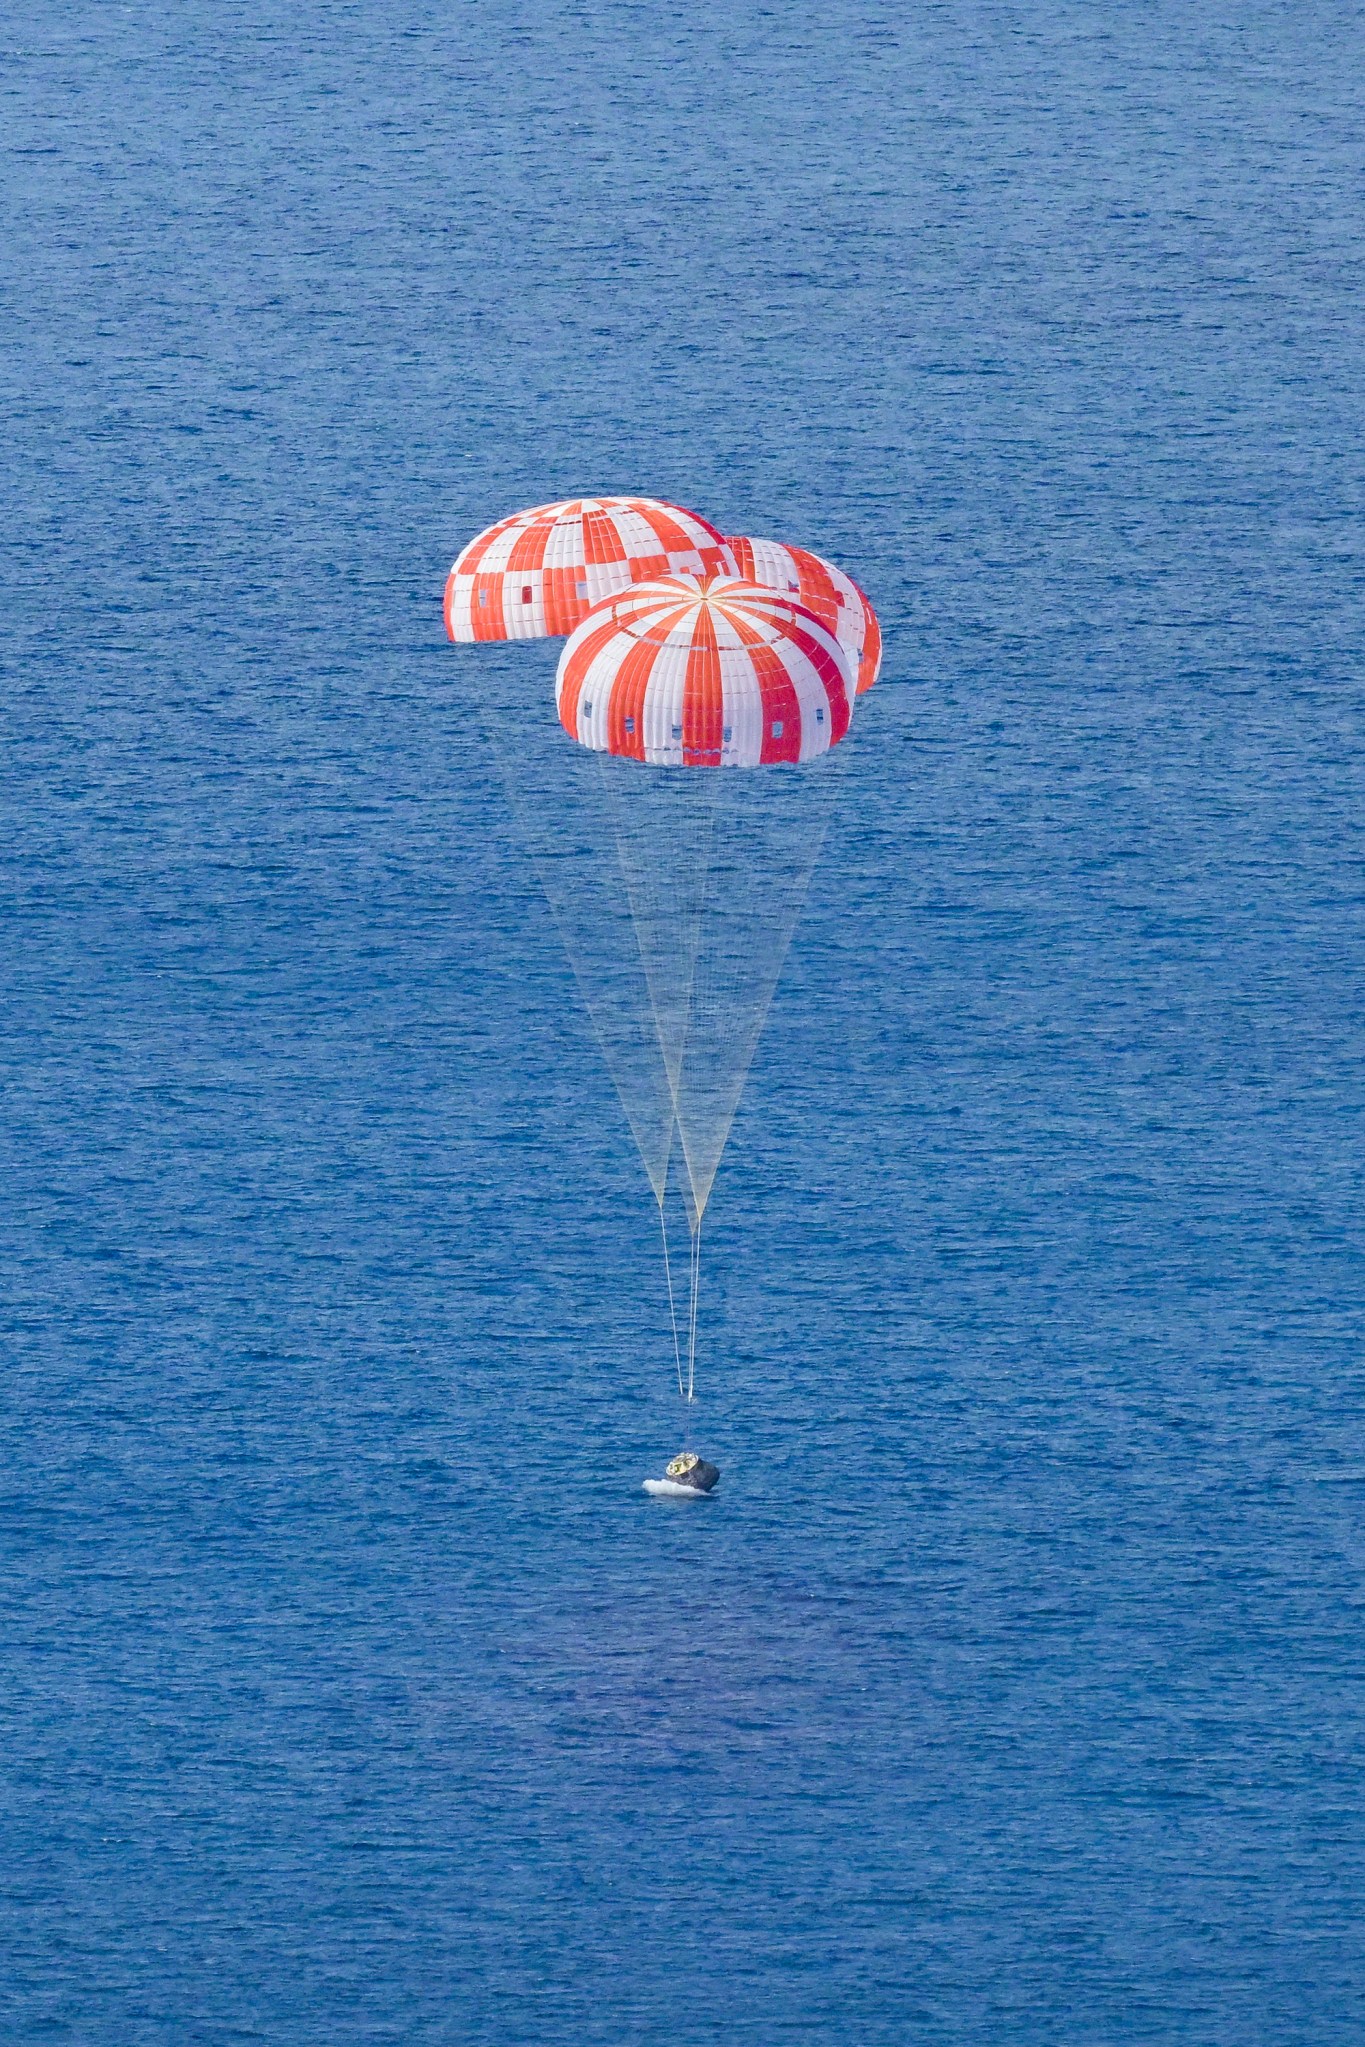 The Orion crew module, with its orange and white main parachutes fully expanded, dips at an angle into the Pacific Ocean at the moment of splashdown. 